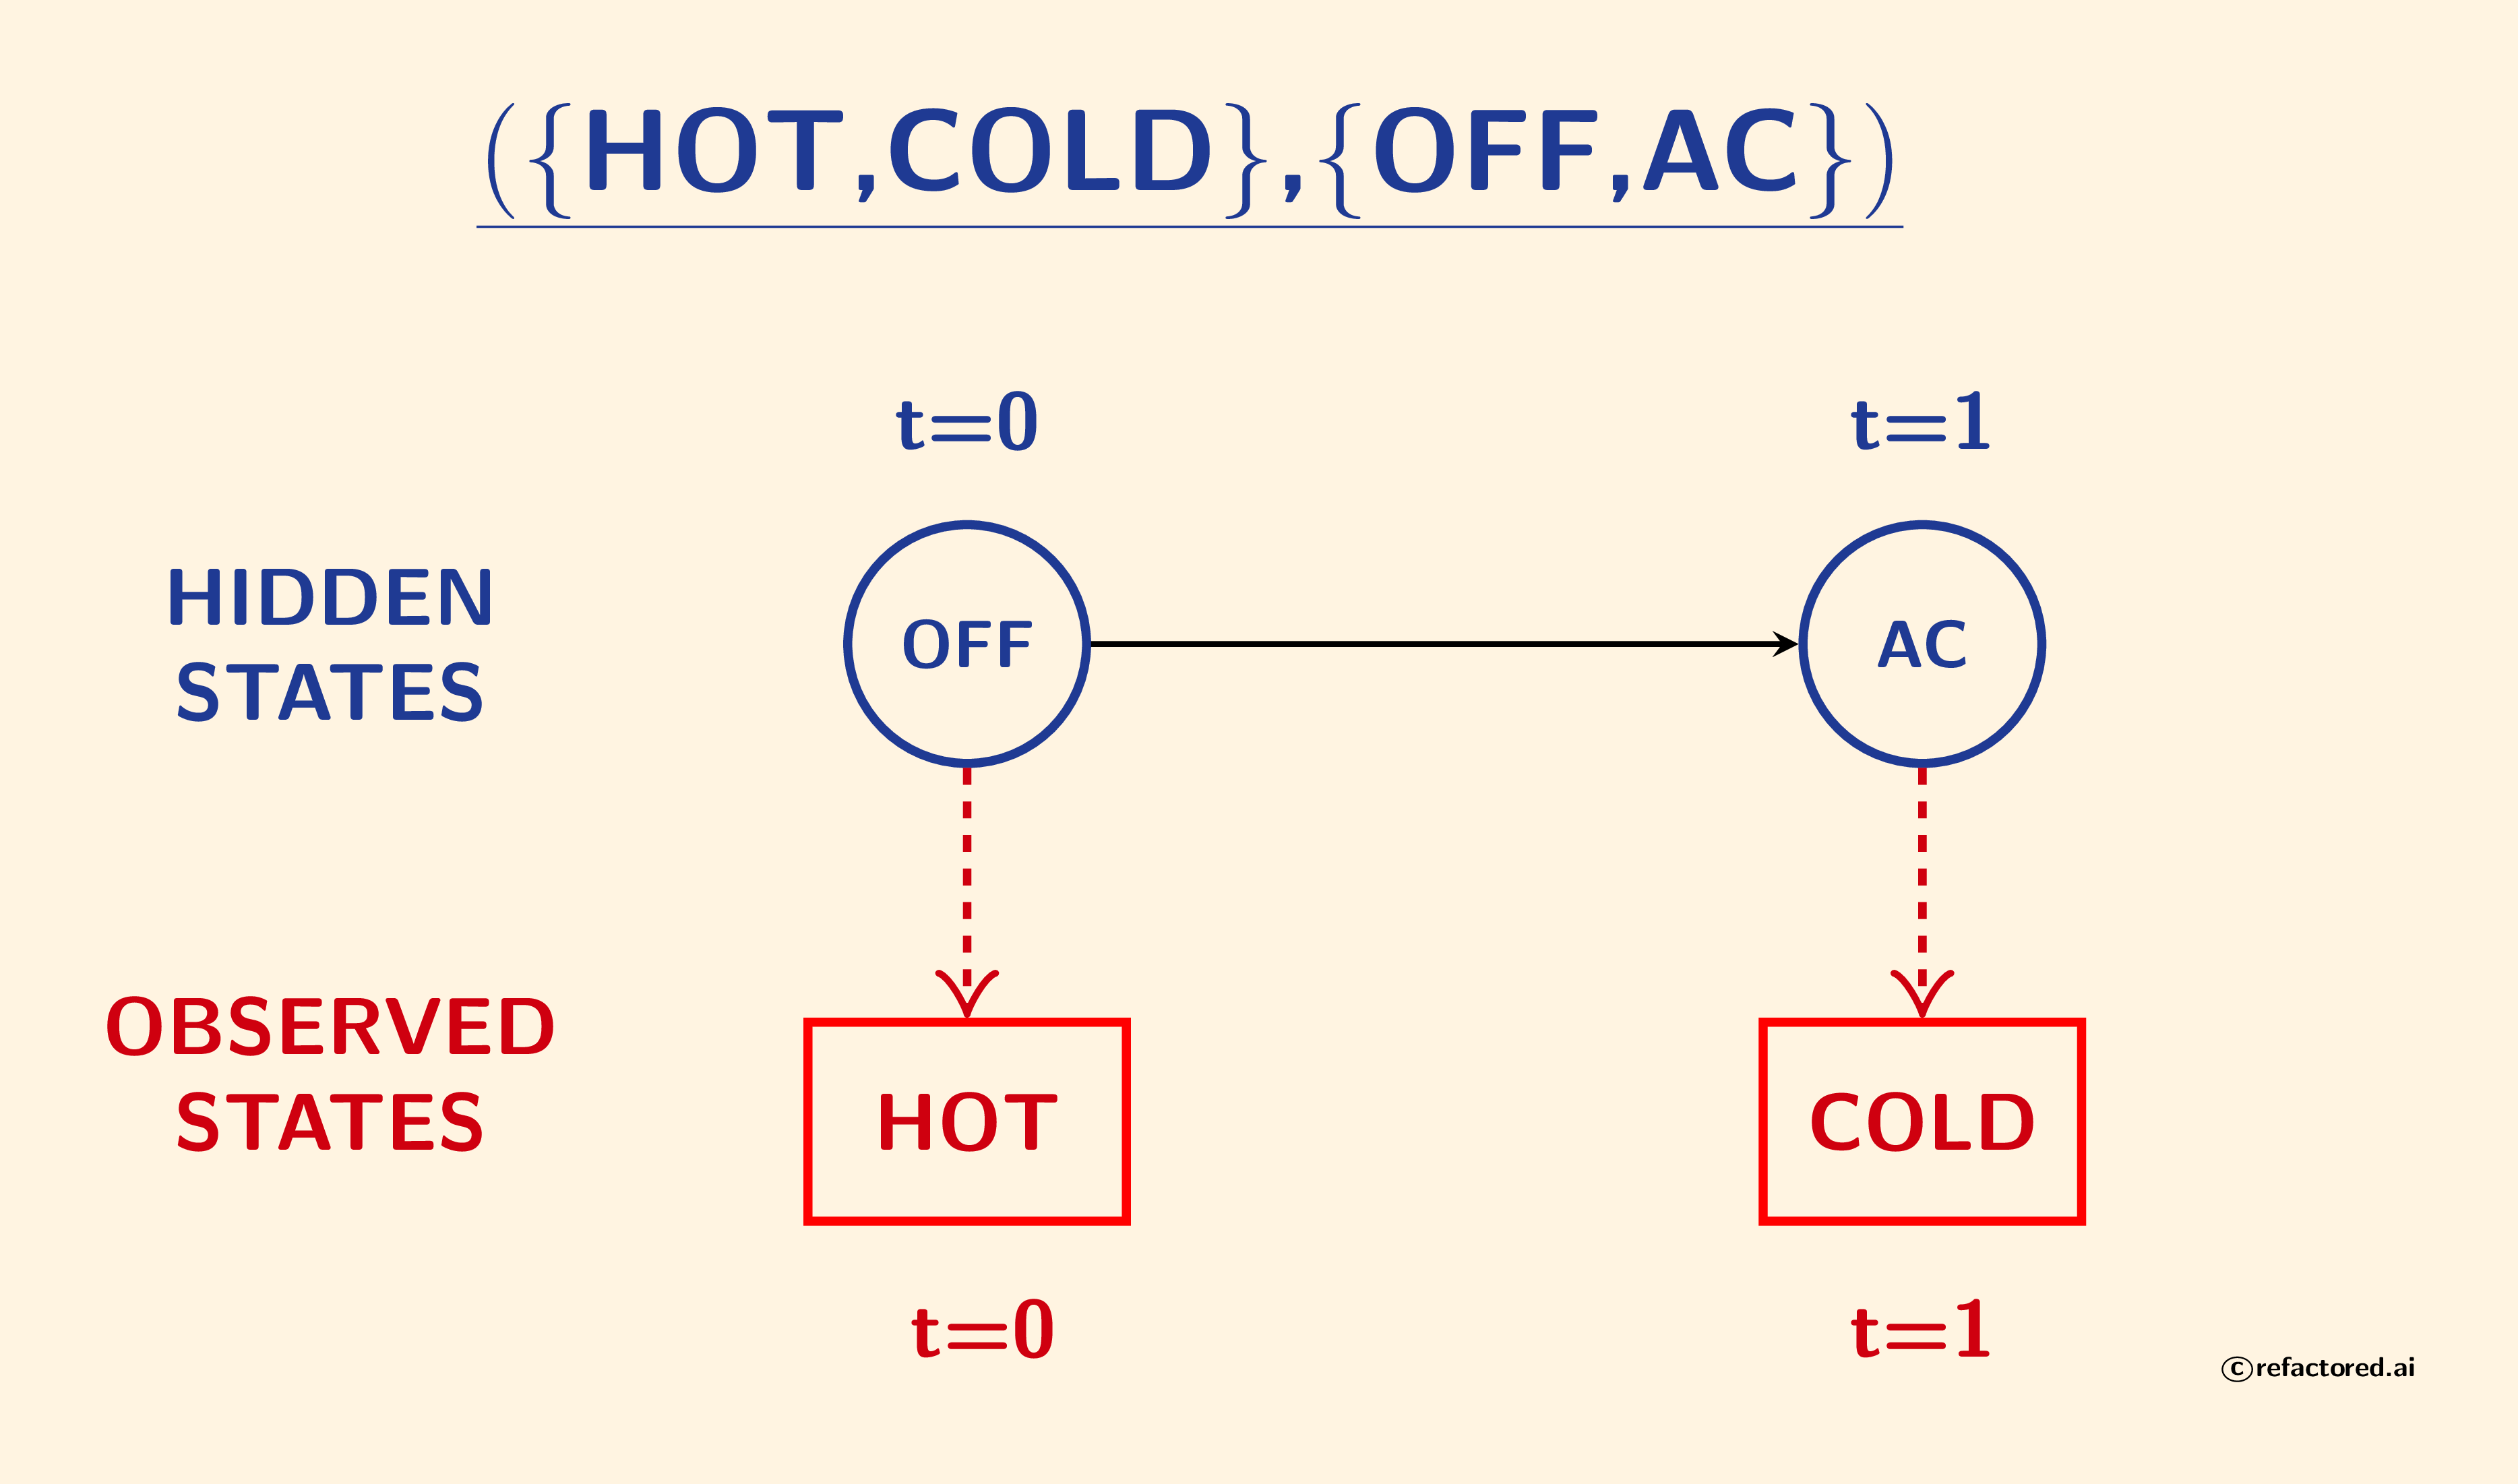 hotcold_seq.png